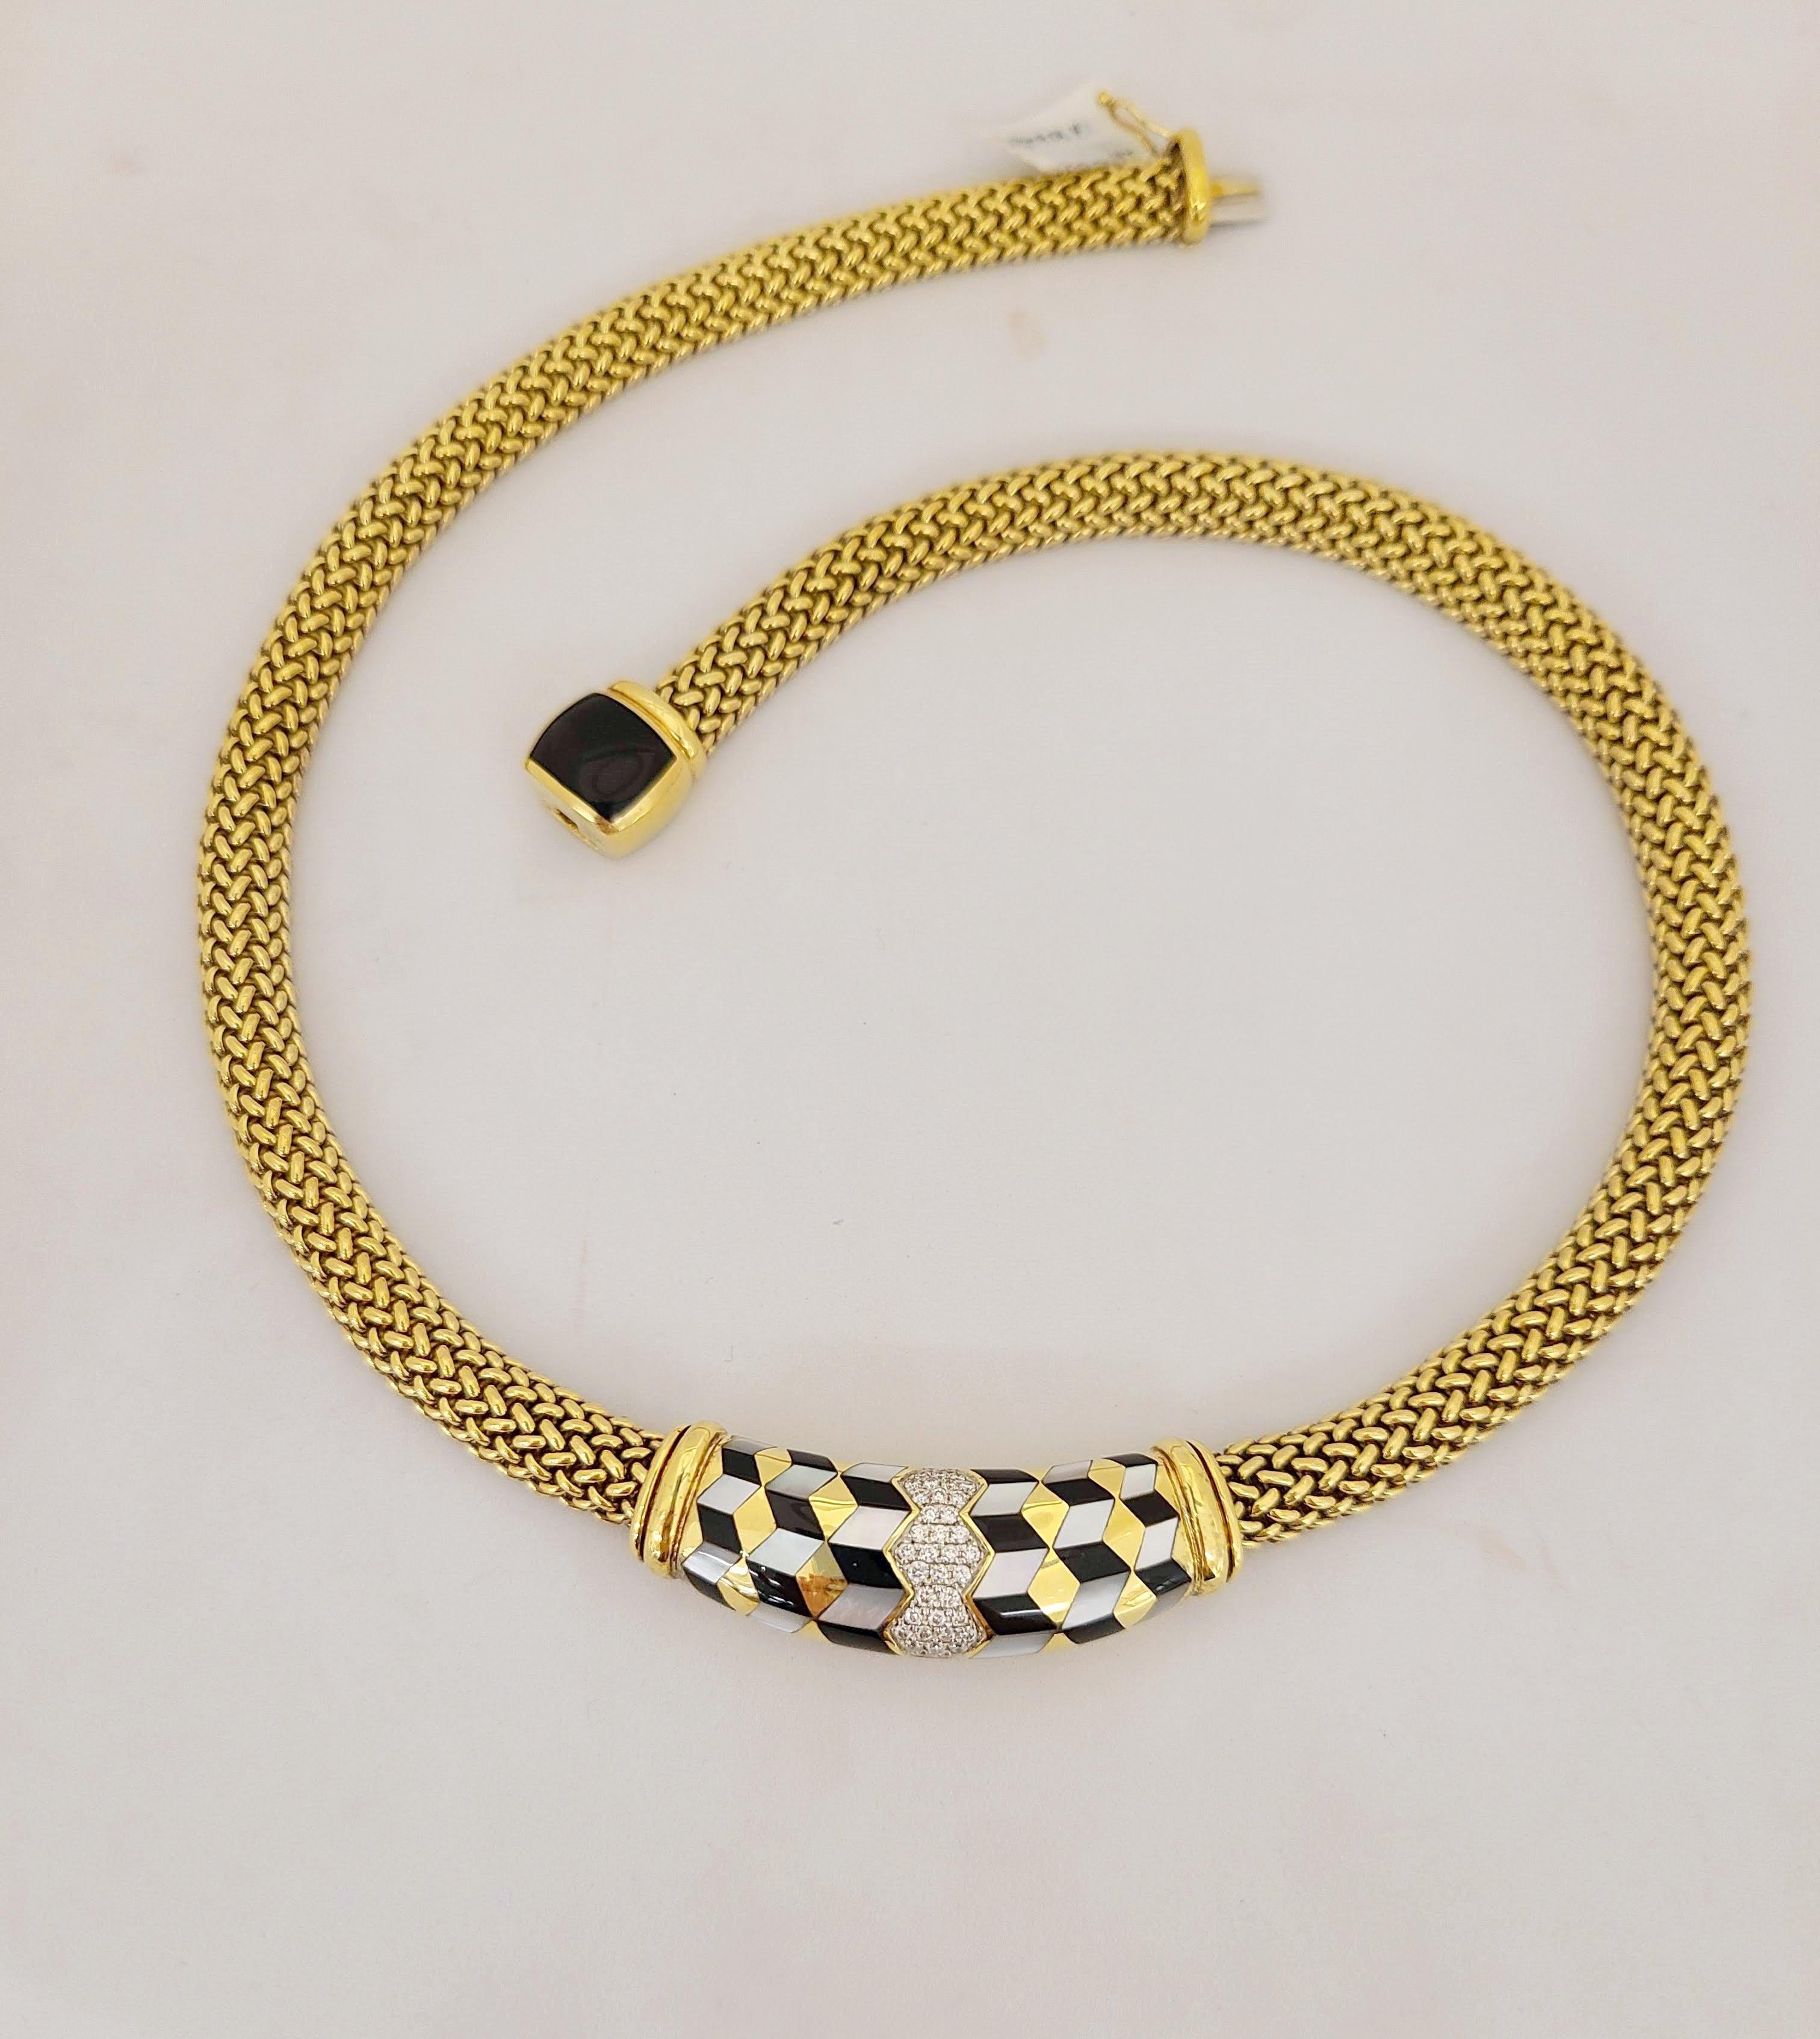 This stunning Asch Grossbardt 18 Karat yellow gold necklace is designed with a yellow gold bombe mesh chain. The centerpiece is inlaid in a geometric motif of Black Onyx,  Mother of Pearl and Diamonds. The clasp is a Black Onyx cushion motif. Total